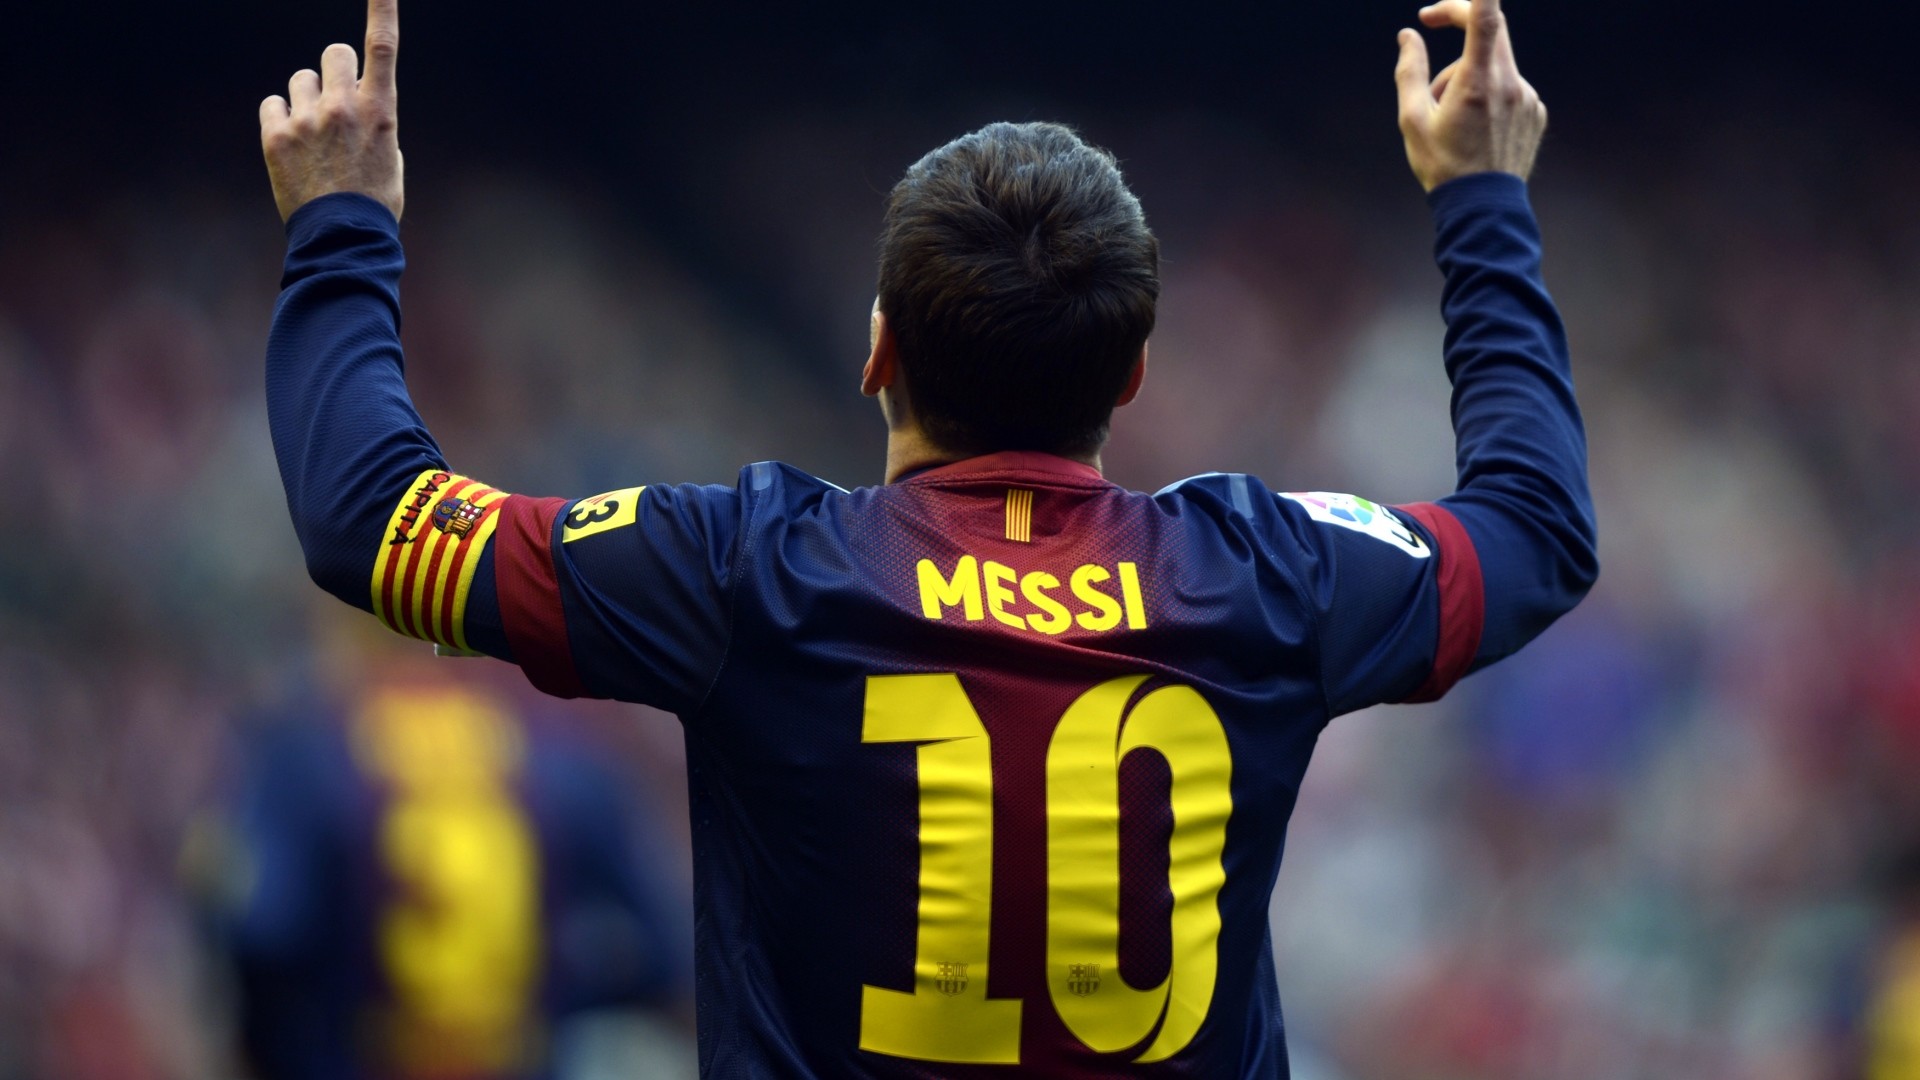 1920x1080 ... Background Full HD 1080p.  Wallpaper lionel messi, player,  back, shirt